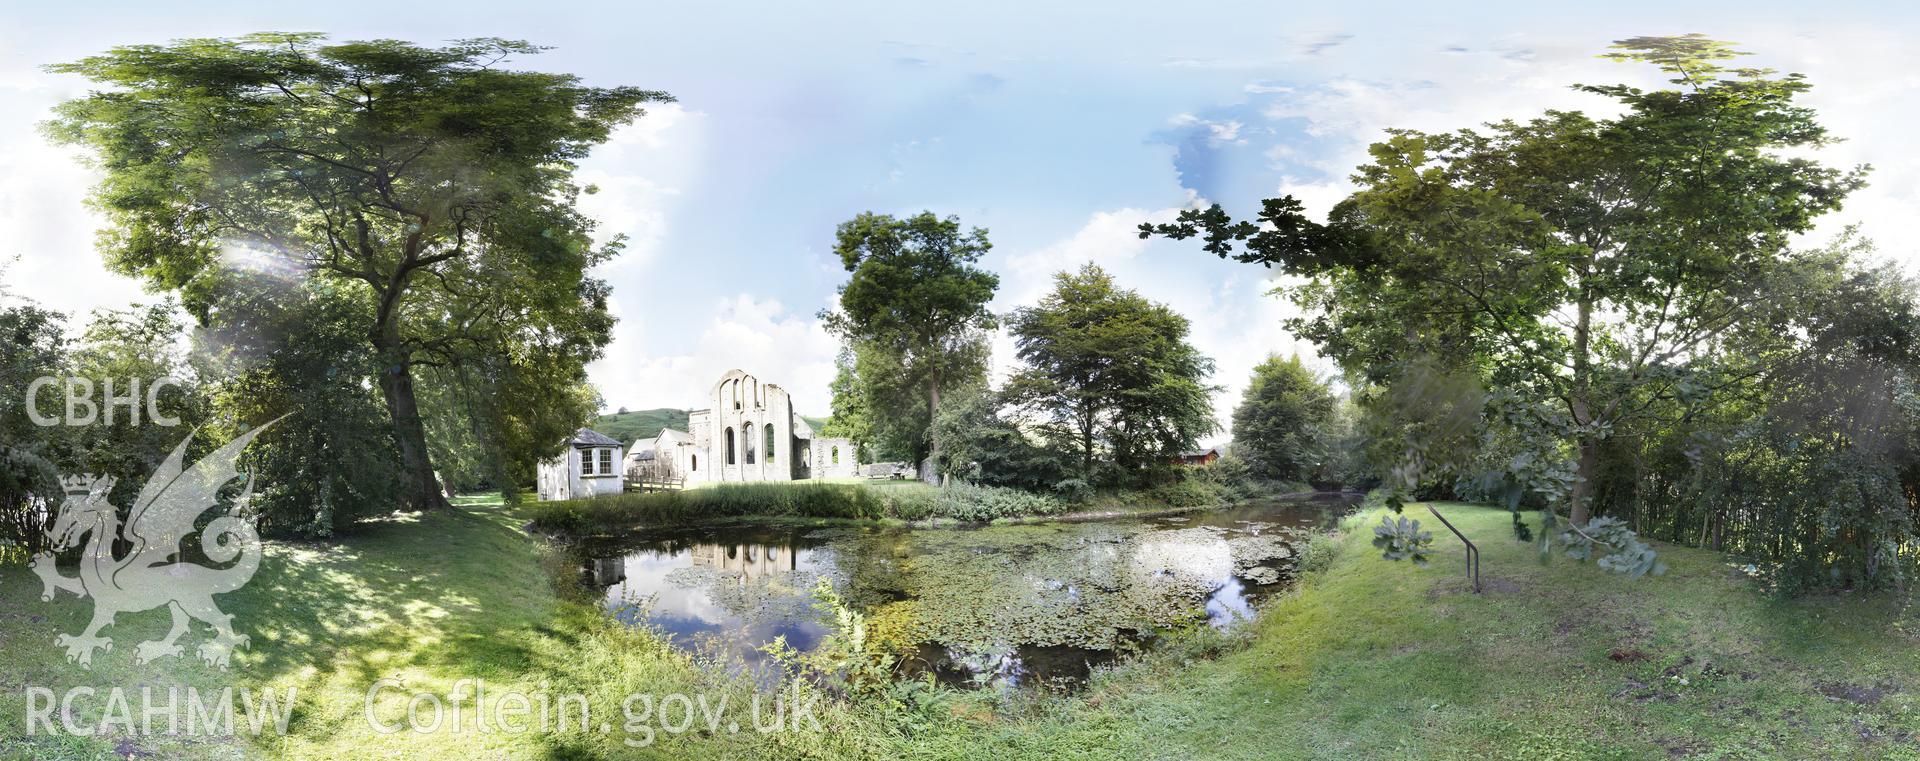 Reduced resolution .tiff file of stitched images next to the fishponds at Valle Crucis Abbey, carried out by Sue Fielding and Rita Singer, July 2017. Produced through European Travellers to Wales project.